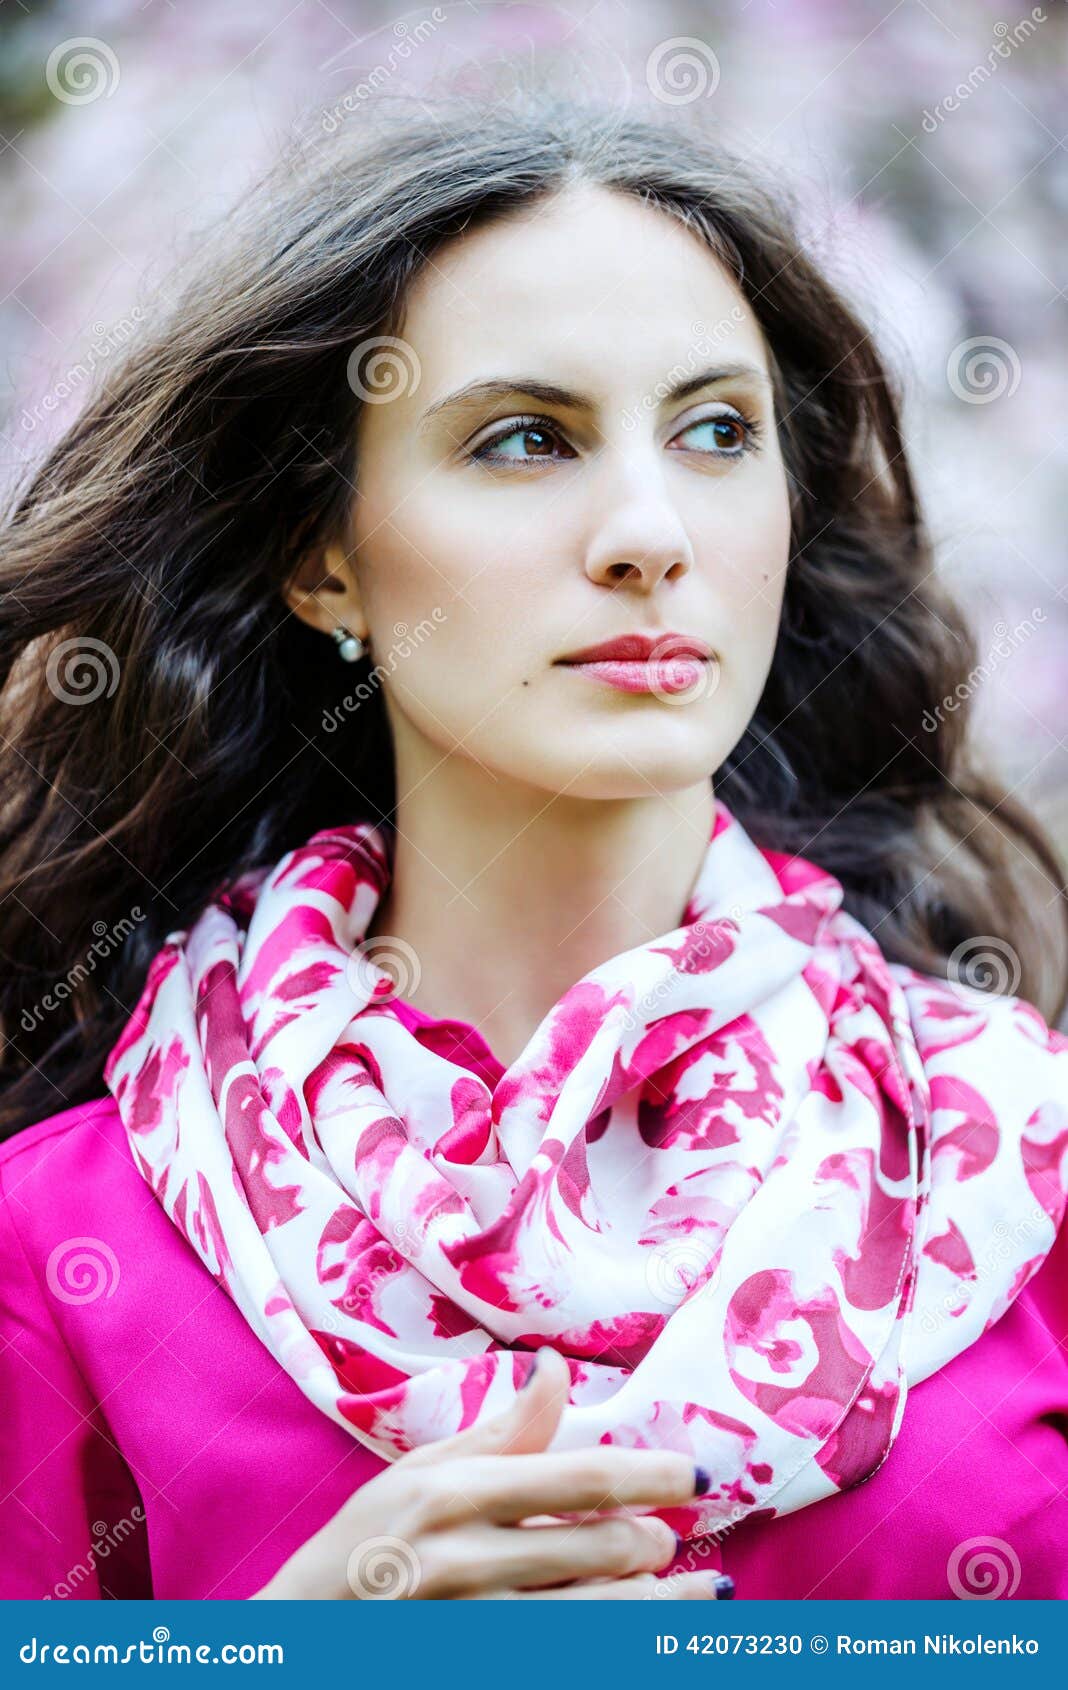 Spring Portrait of a Beautiful Young Woman Stock Photo - Image of ...